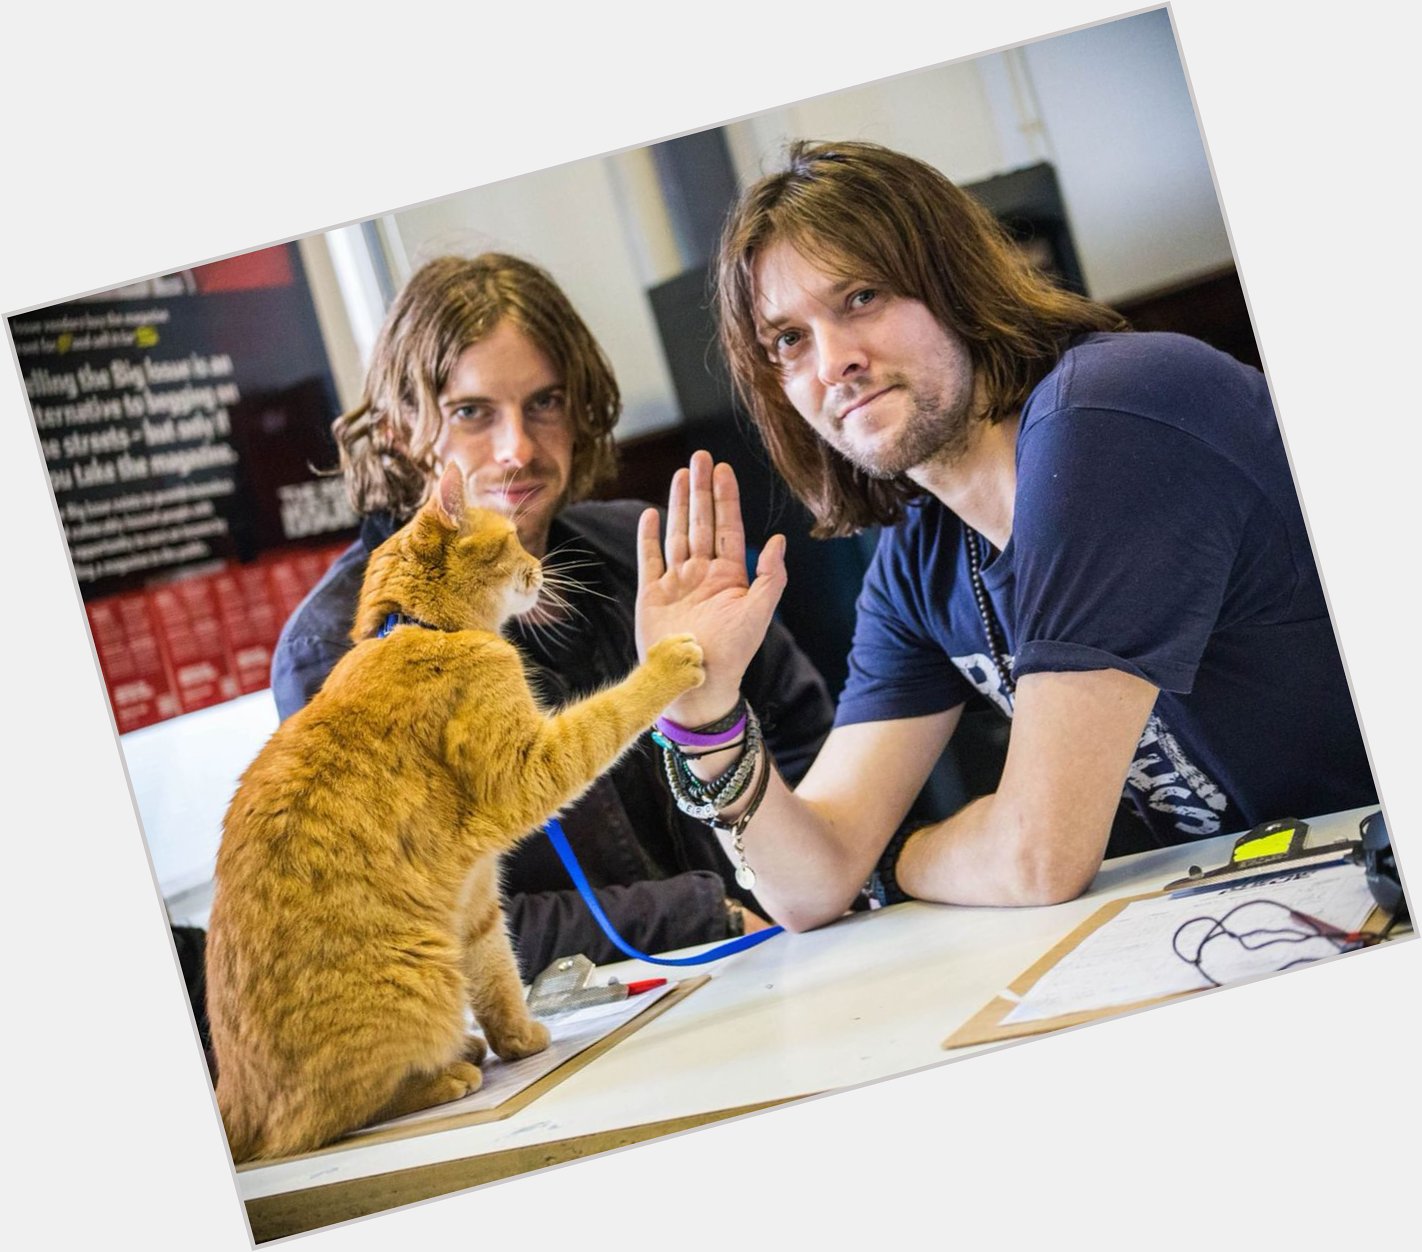 Happy birthday, James Bowen! Hope you and have a purrfect day  